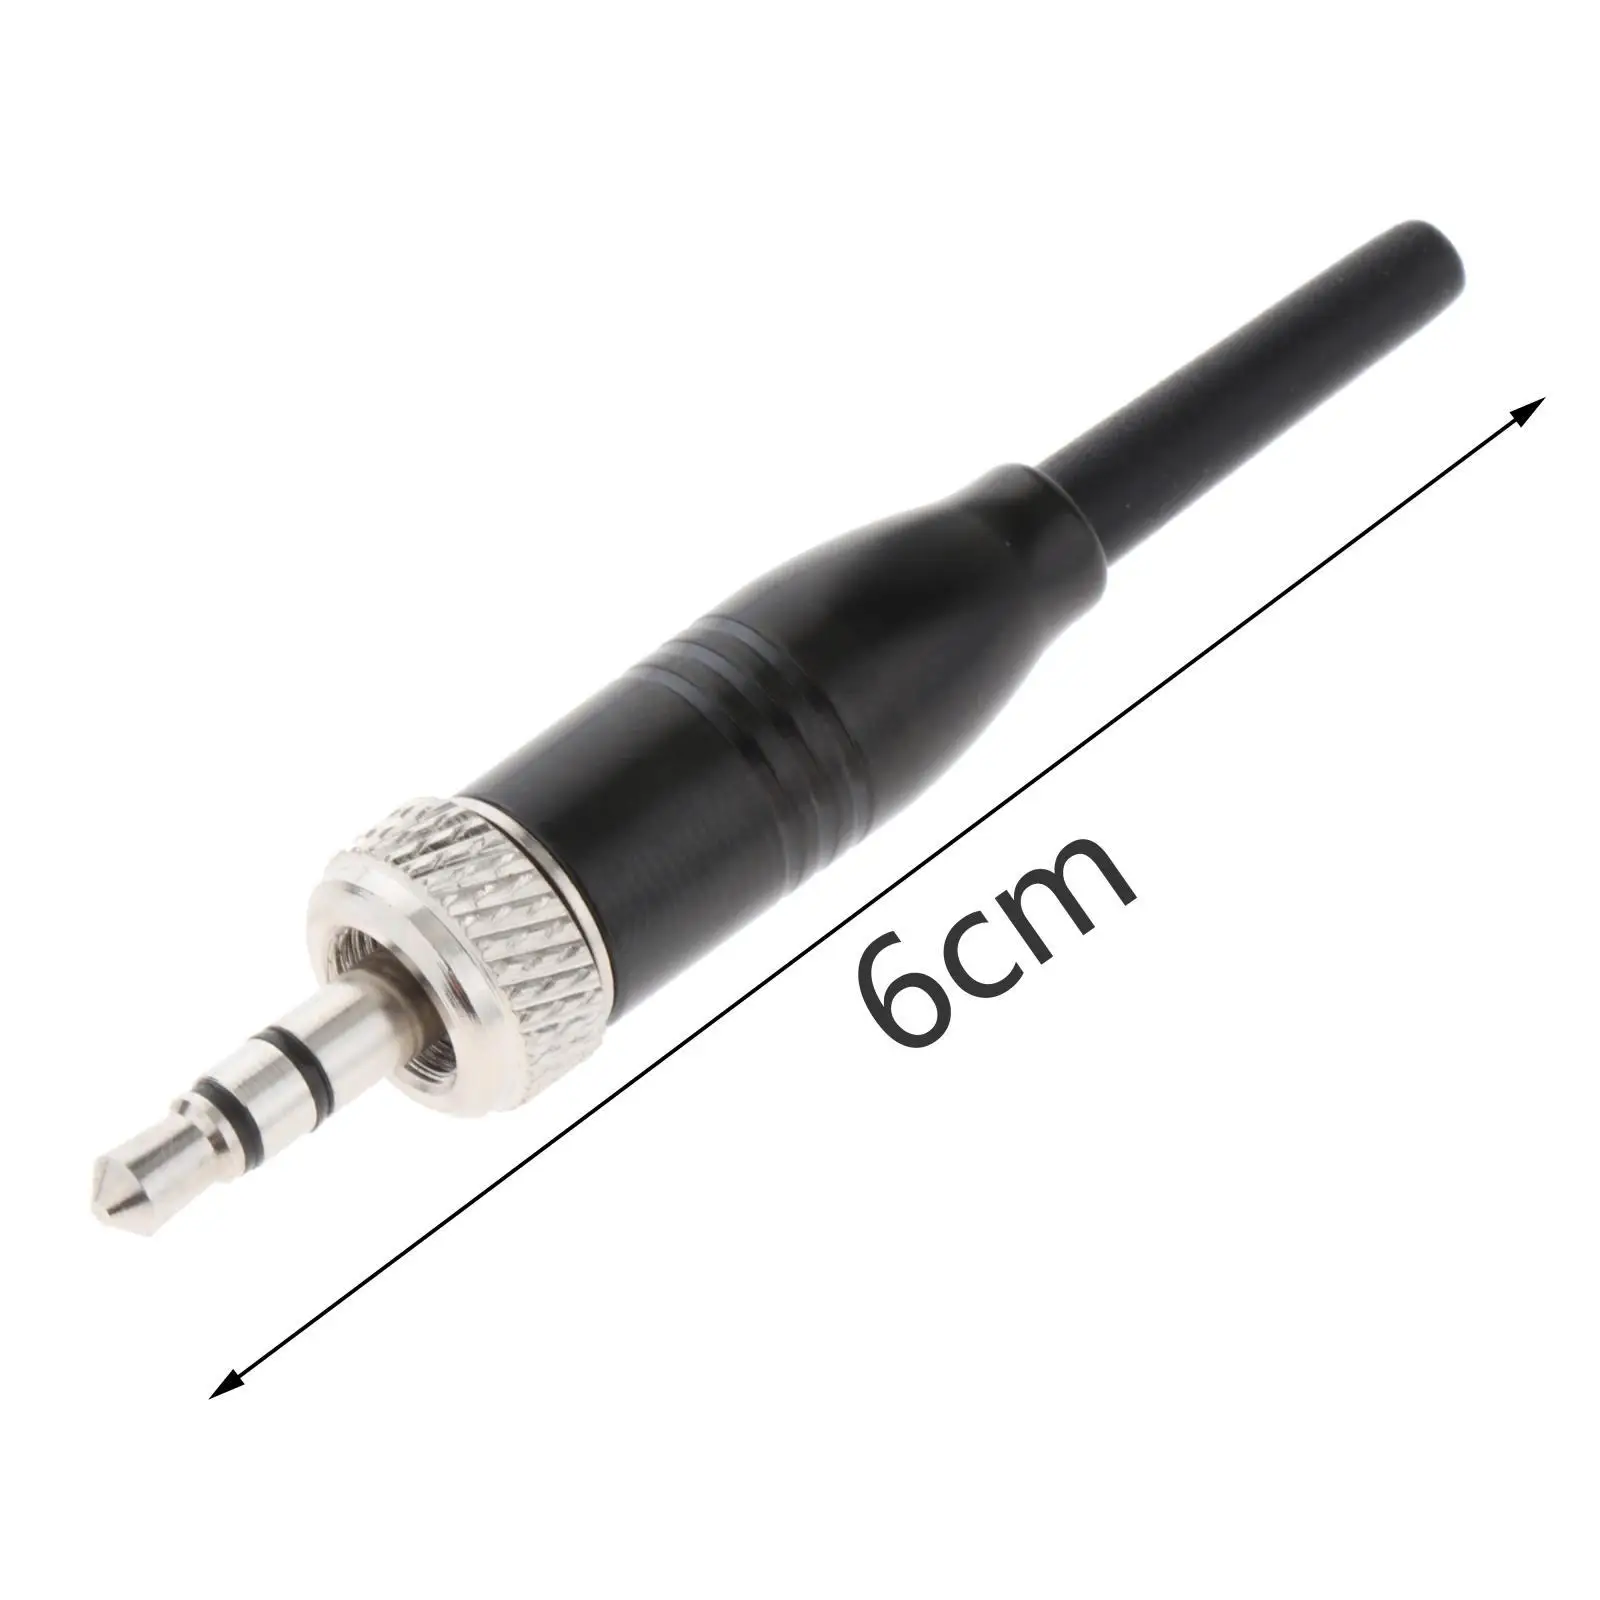 1 Piece 3.5mm Lock Stereo Jack Plug Durable Accs Reliable Audio DIY Zinc Alloy Supply 6cm Stereo Male for Repair Mic Earphone